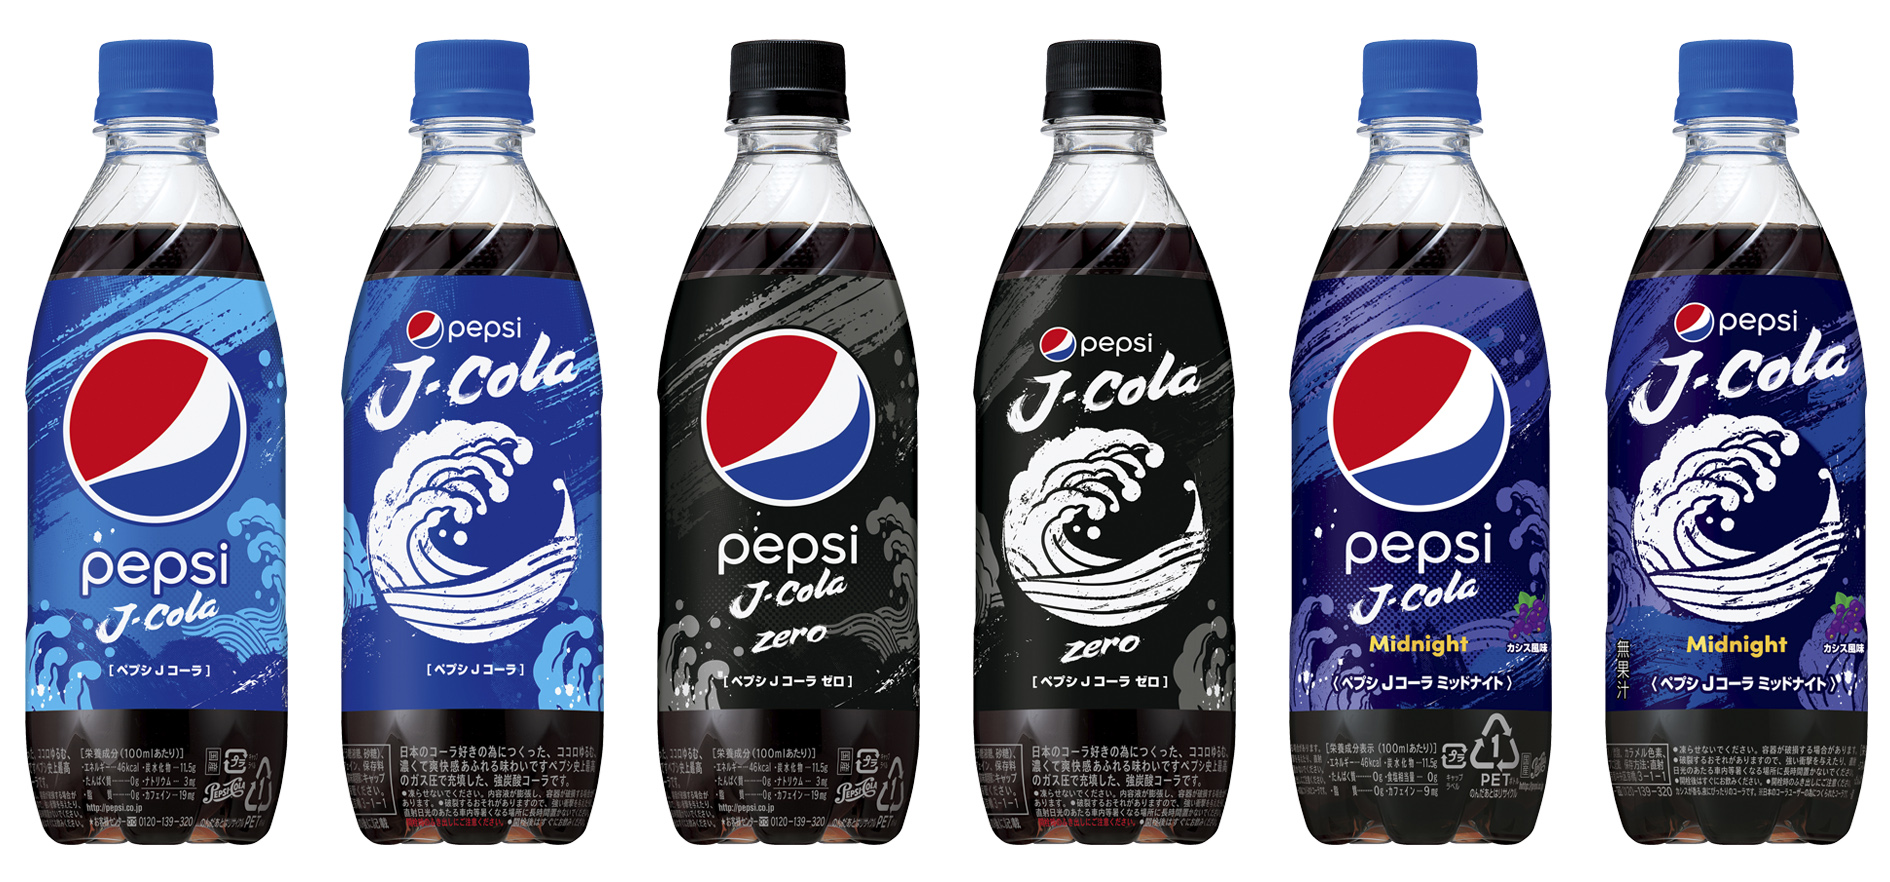 Pepsi Launches J-Cola, A Special Pepsi Aimed At Japan